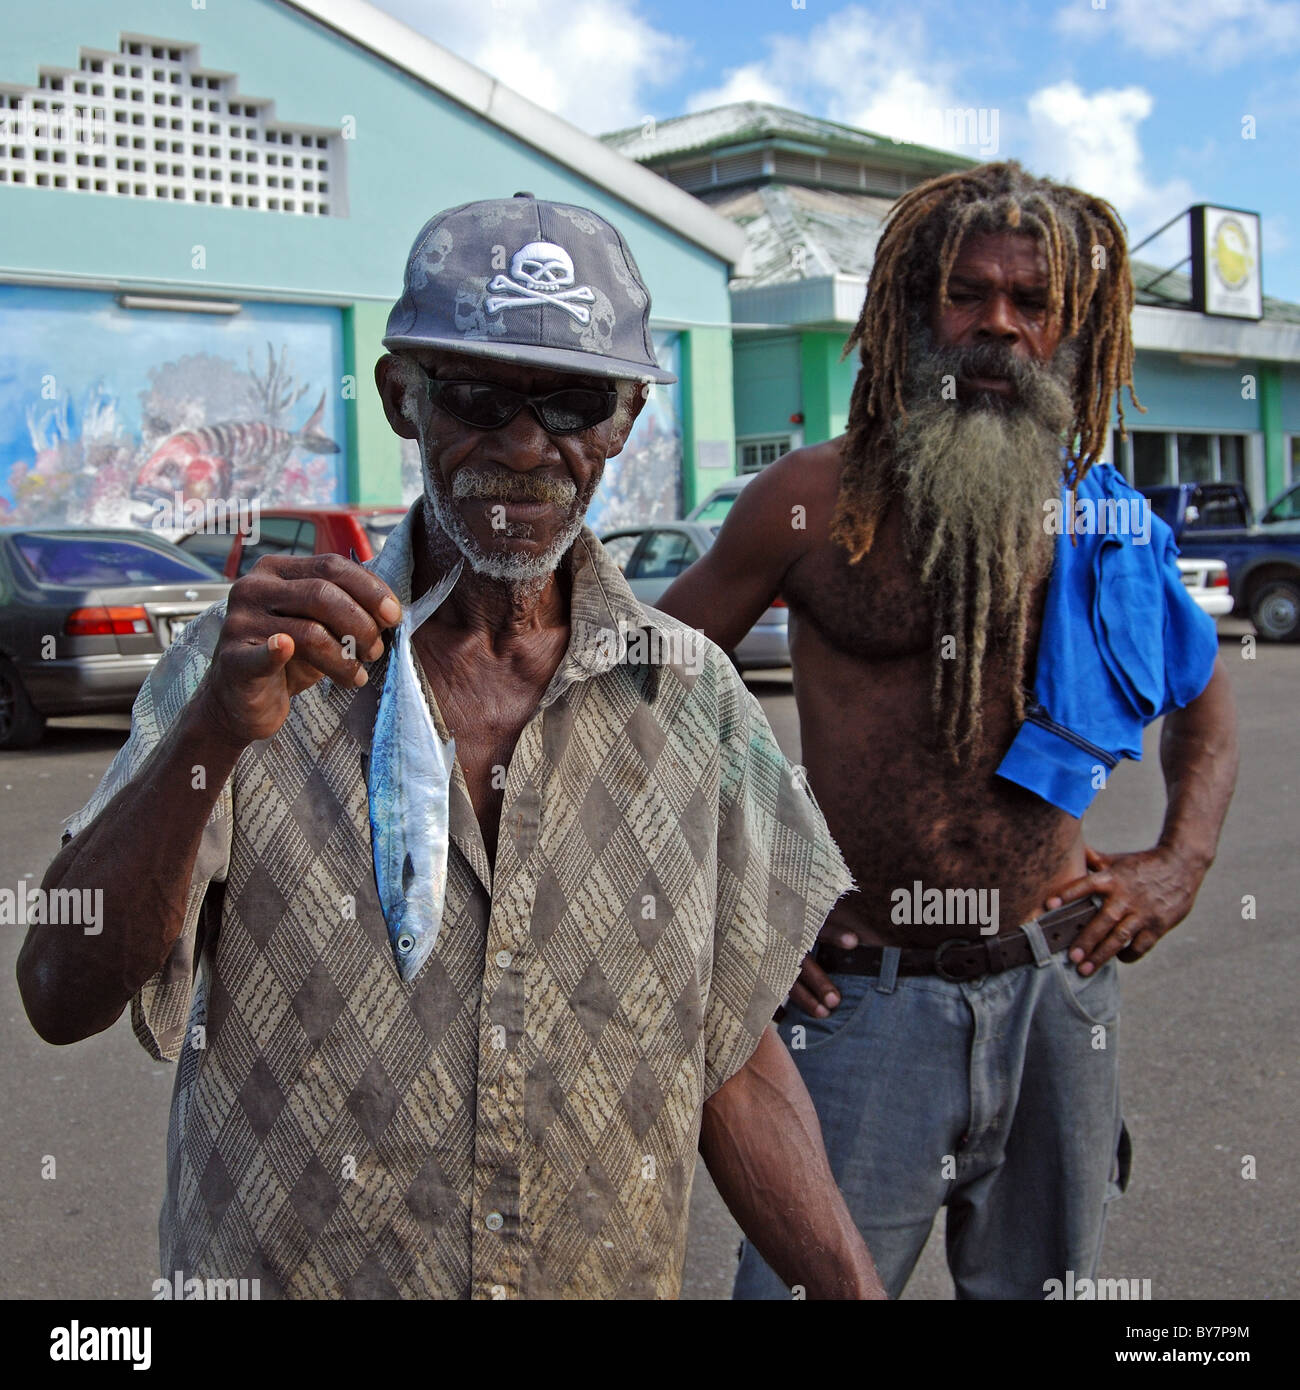 Local man holding a fish, Castries, St. Lucia, Caribbean. Stock Photo